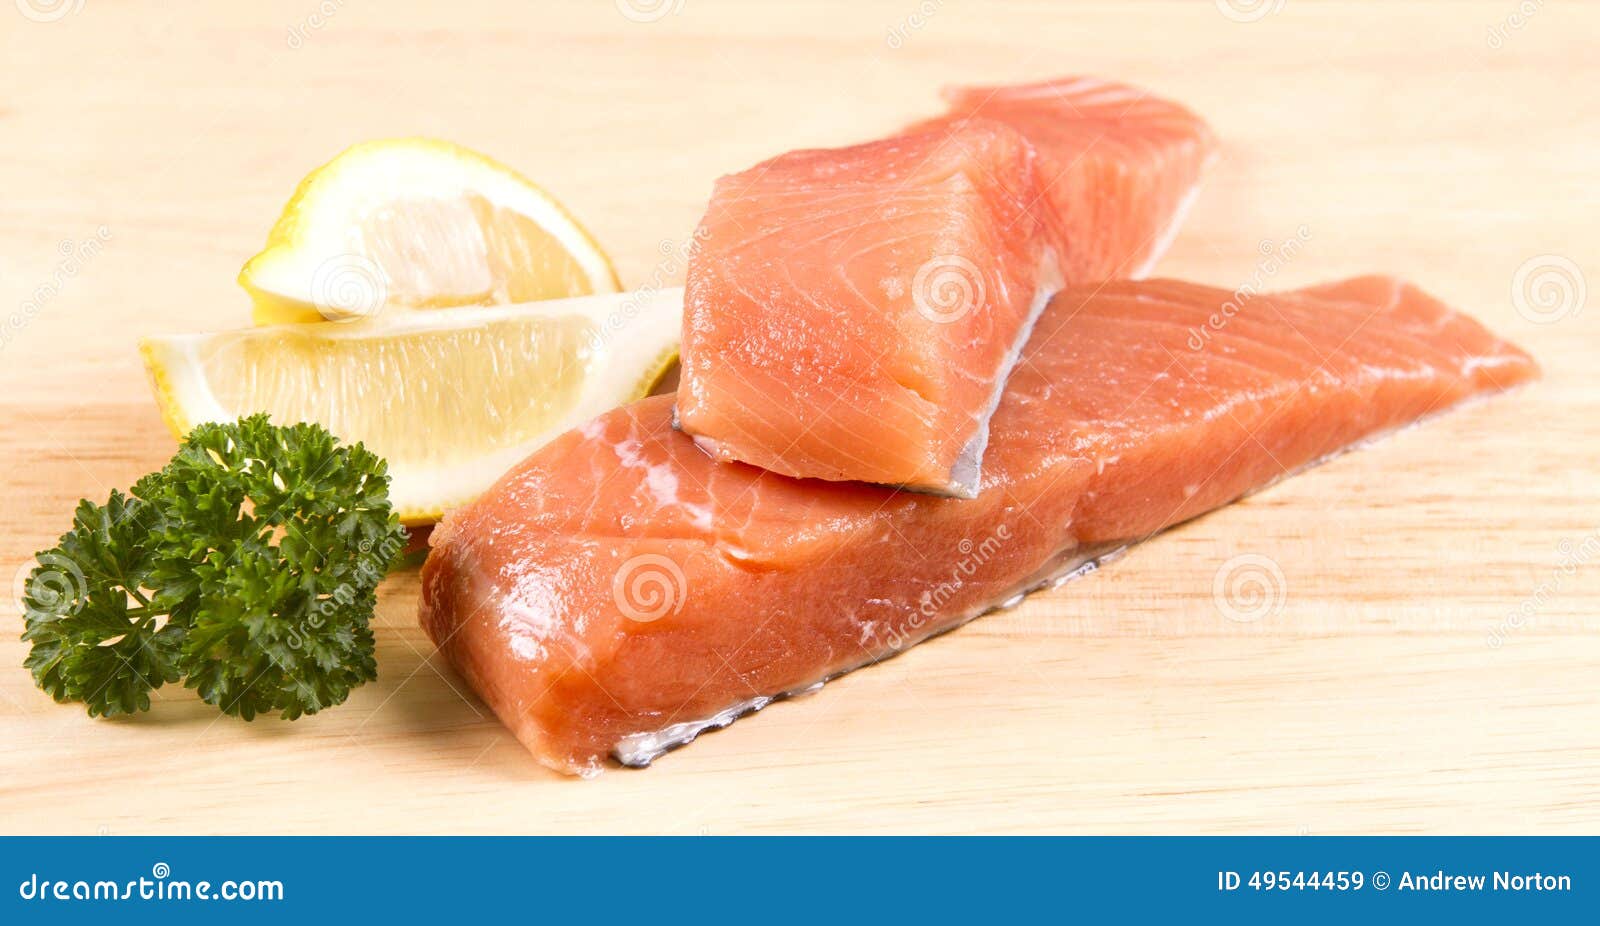 Raw salmon fillets stock image. Image of fillet, fish - 49544459